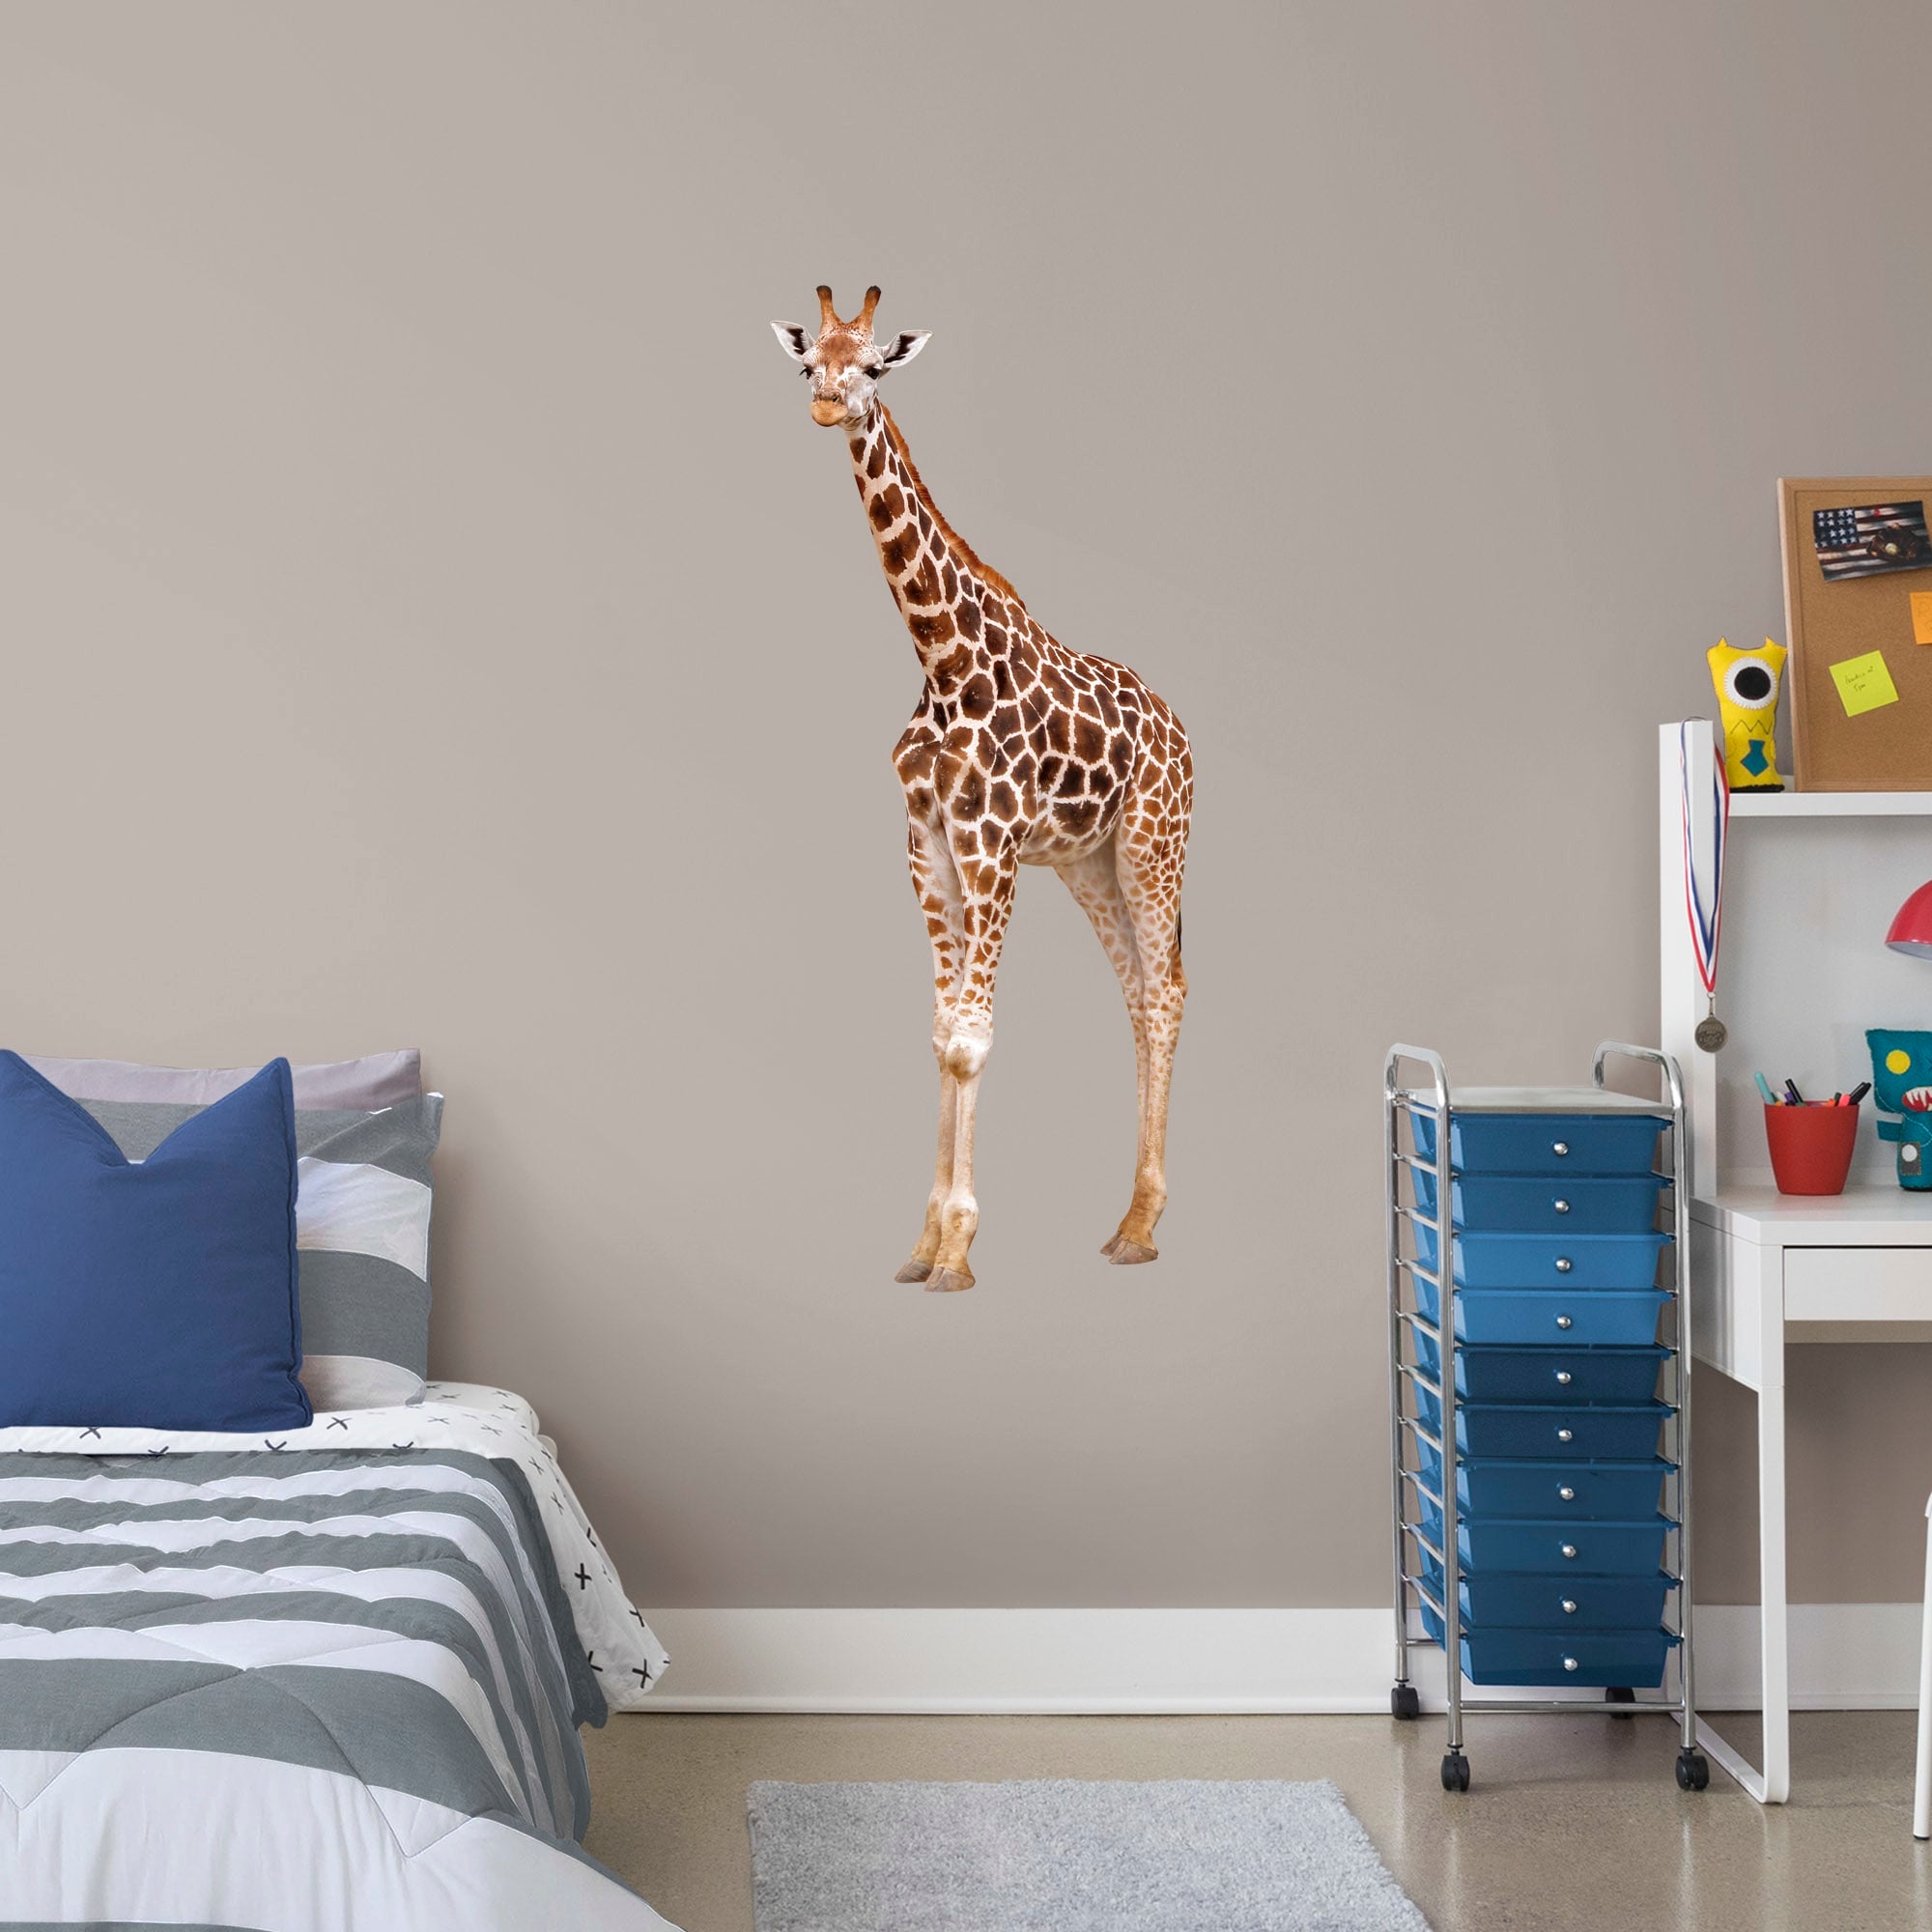 Giraffe - Removable Vinyl Decal Giant Animal + 2 Decals (24"W x 55"H) by Fathead